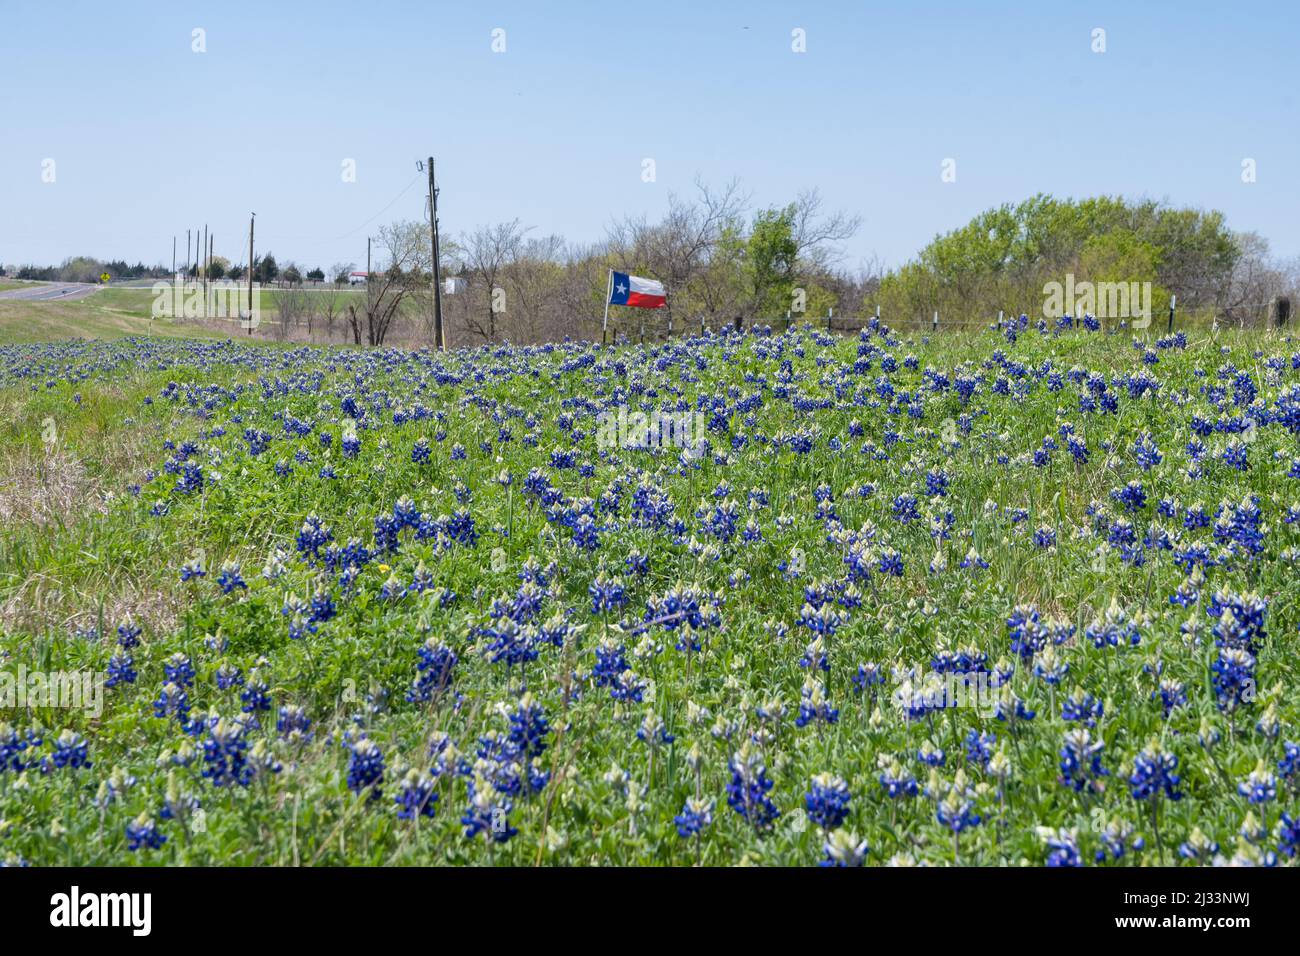 A patch of Bluebonnet flowers blooming in a roadside ditch on a sunny, windy day with a Texas flag waving by a fence in the background. Stock Photo